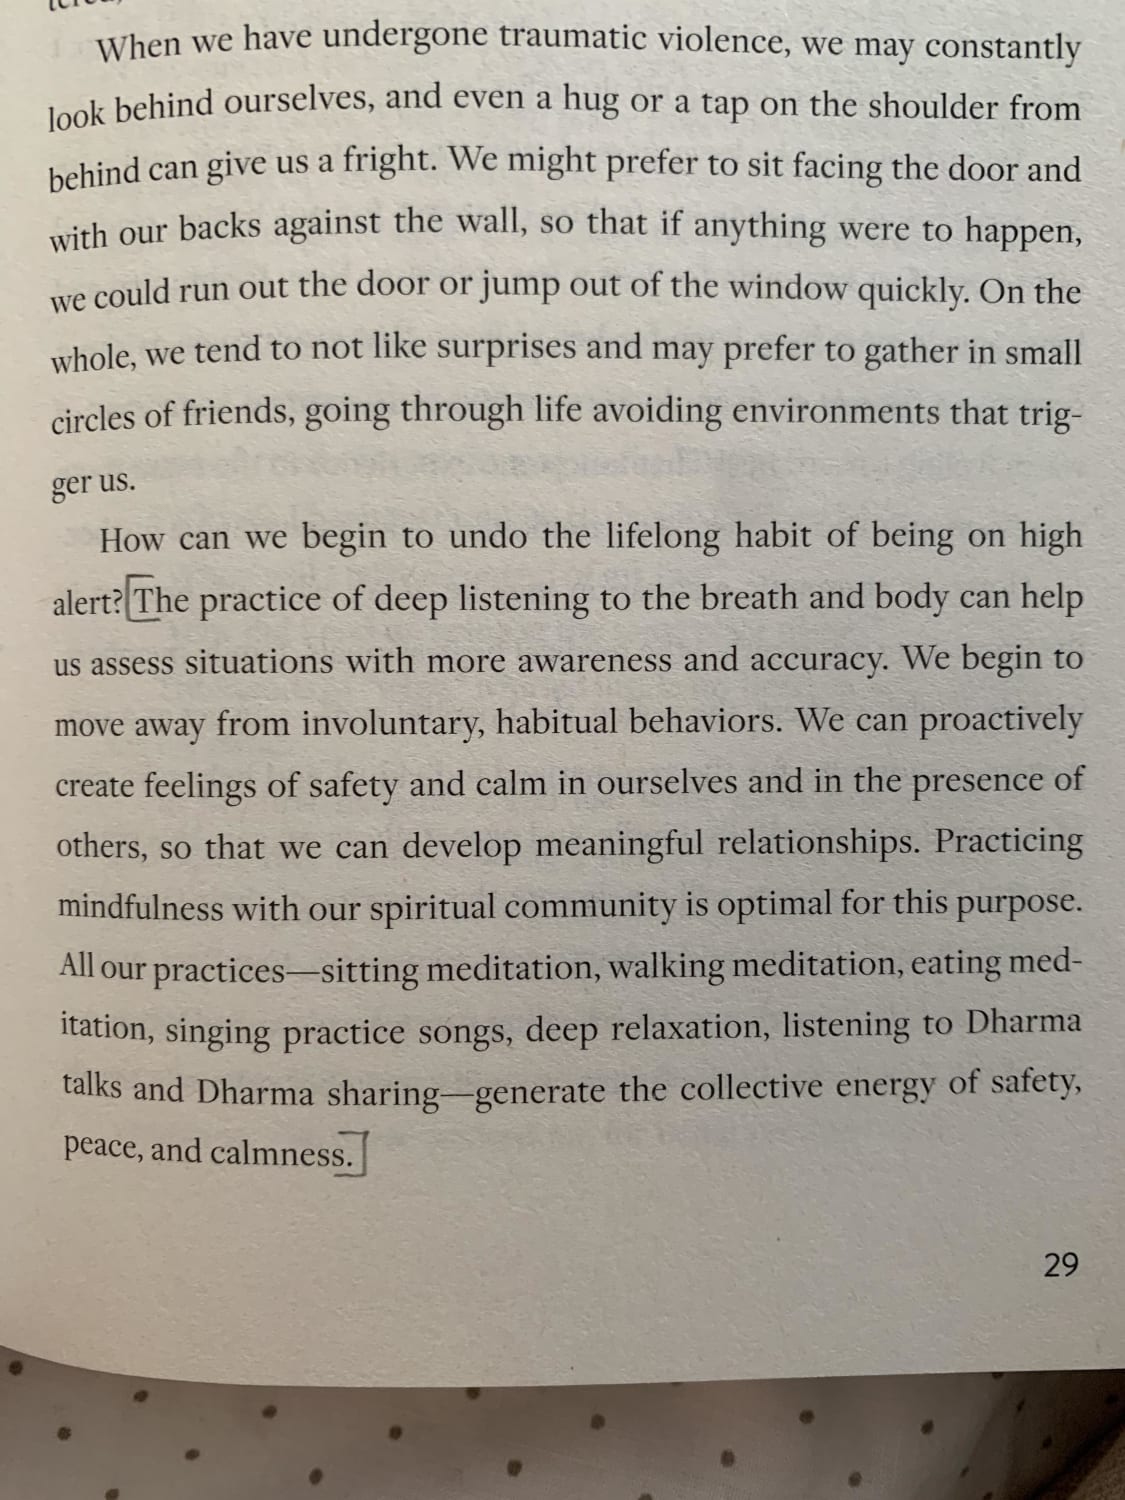 How to start dealing with suffering and trauma. Book: Flowers in the dark, by sister Dang Nghiem